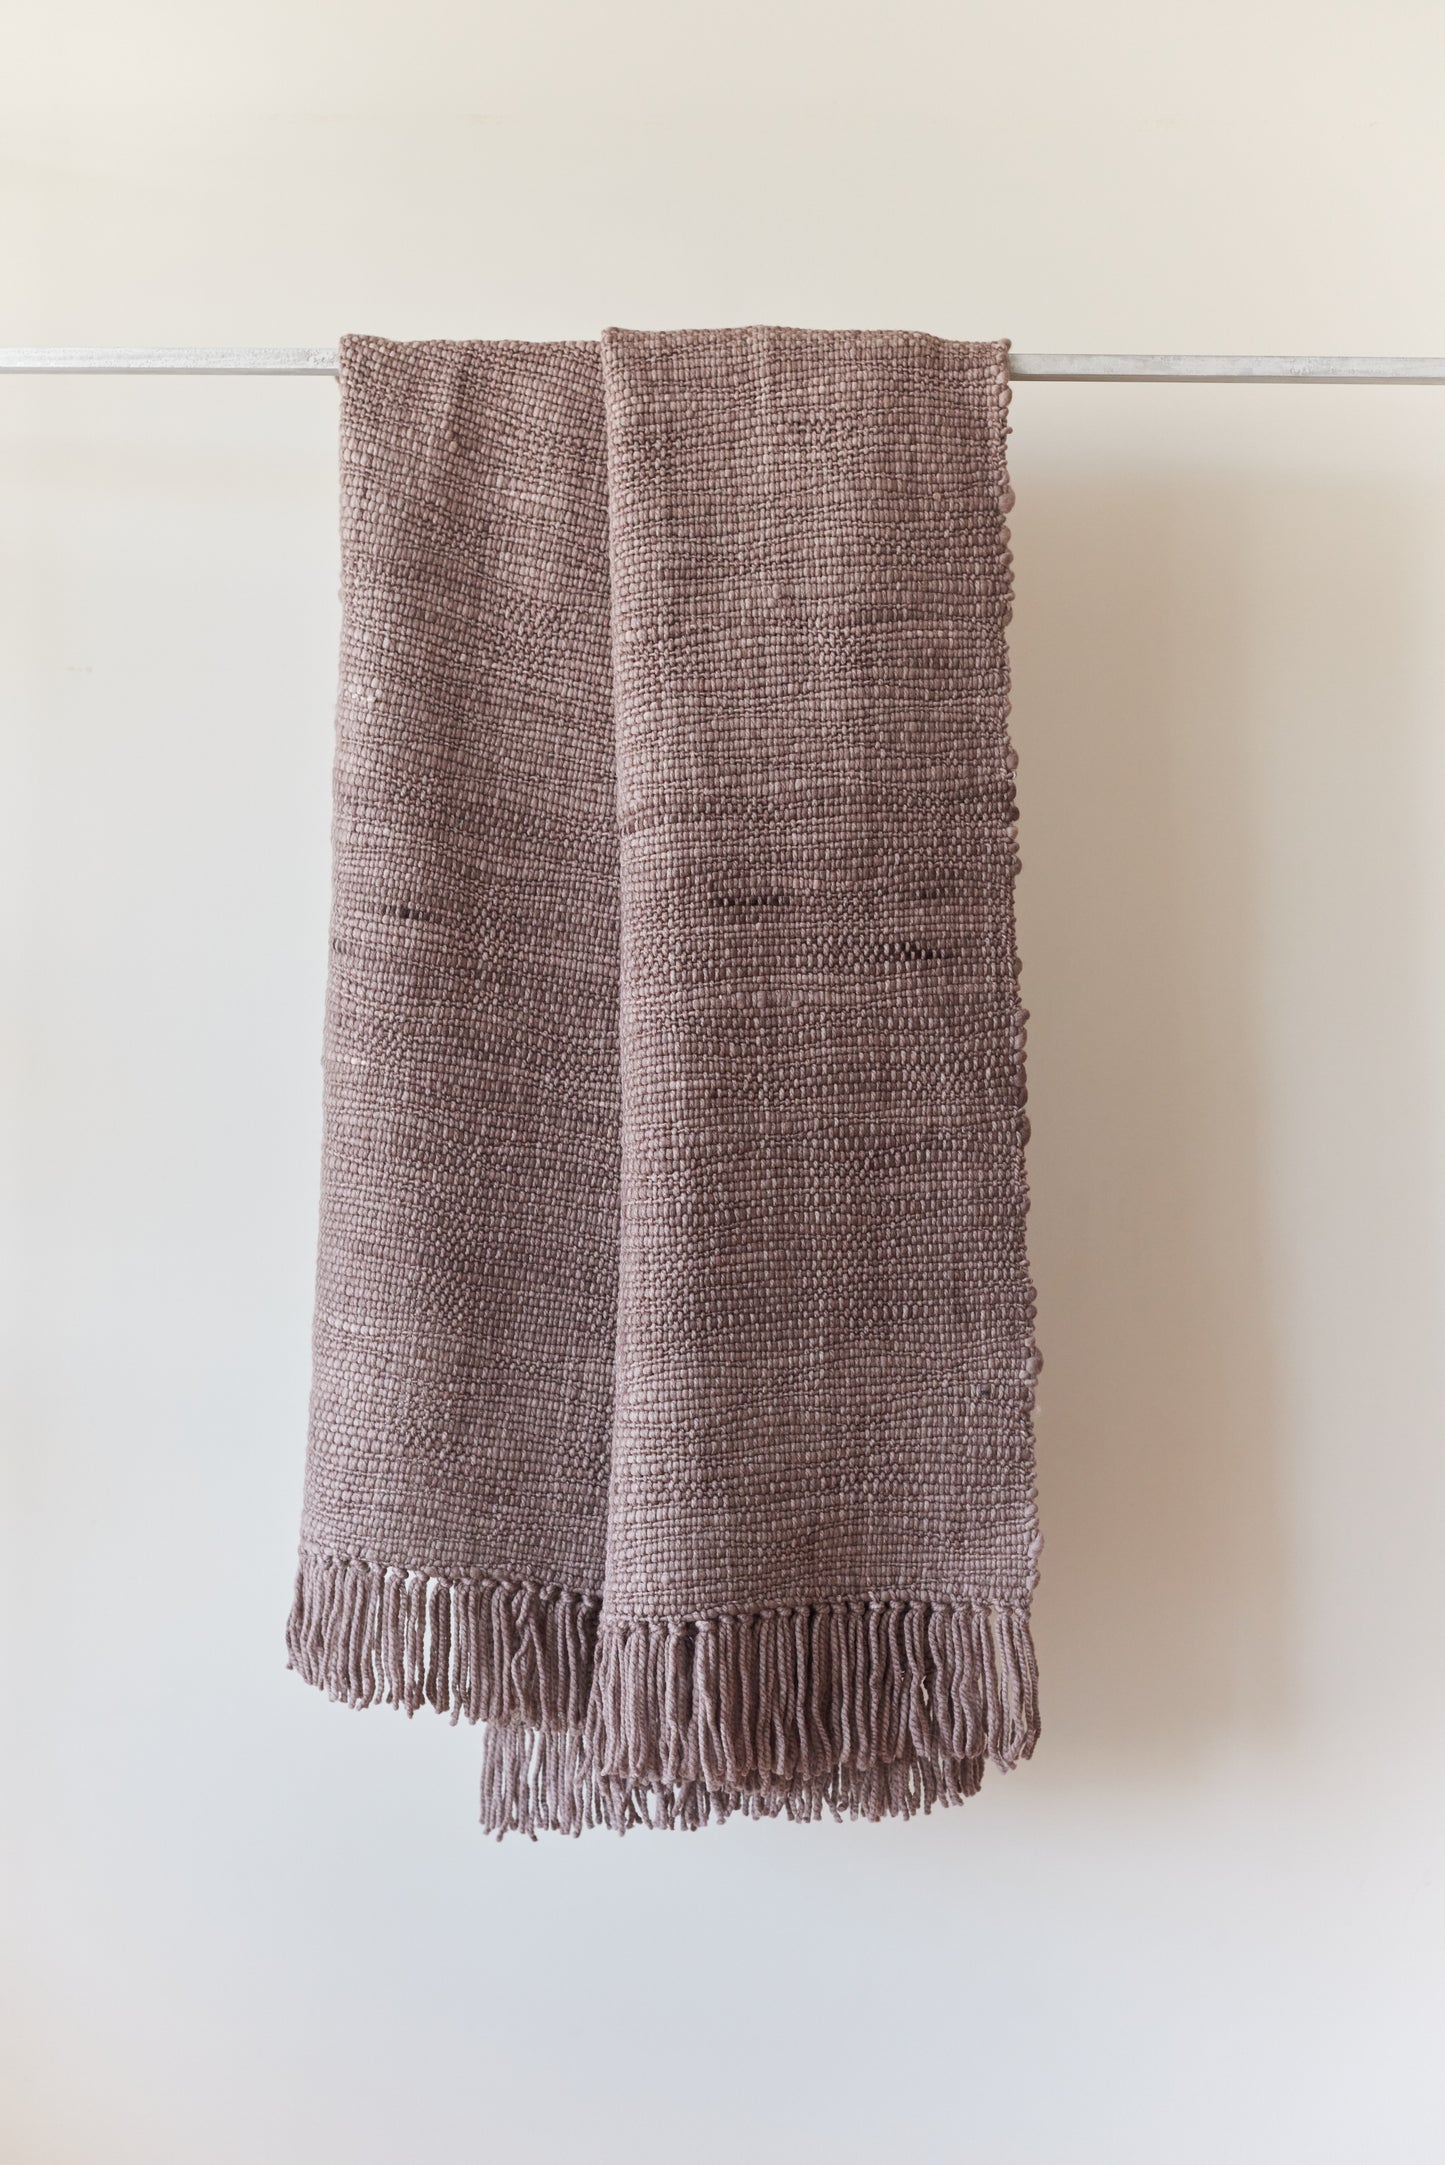 Throw Blanket in Taupe Aroma